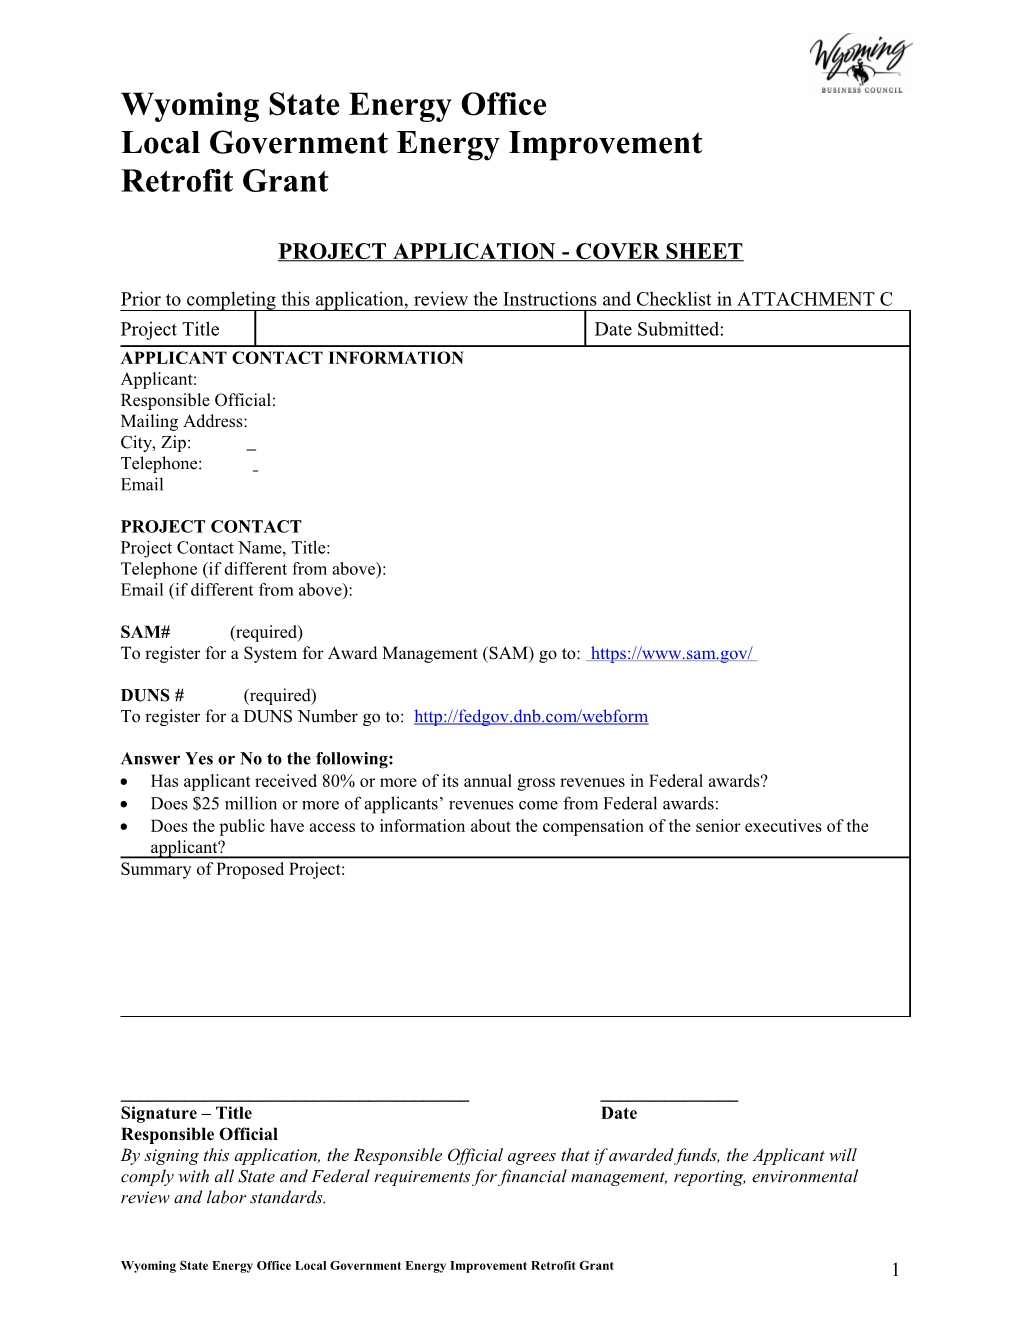 Energy Efficiency and Conservation Block Grant Project Application - Cover Sheet